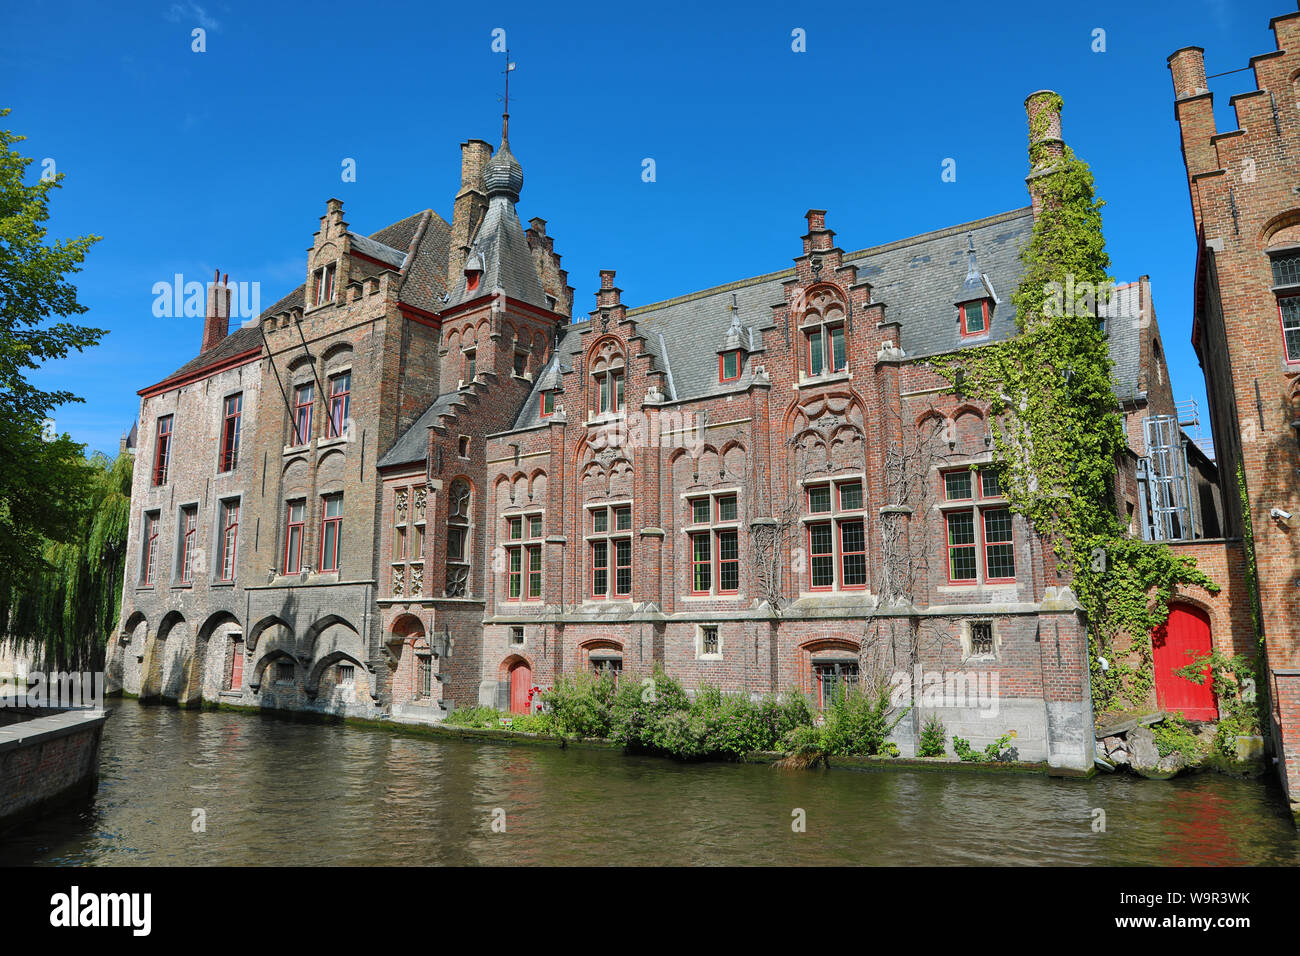 Buildings along the canals, Bruges, Belgium Stock Photo